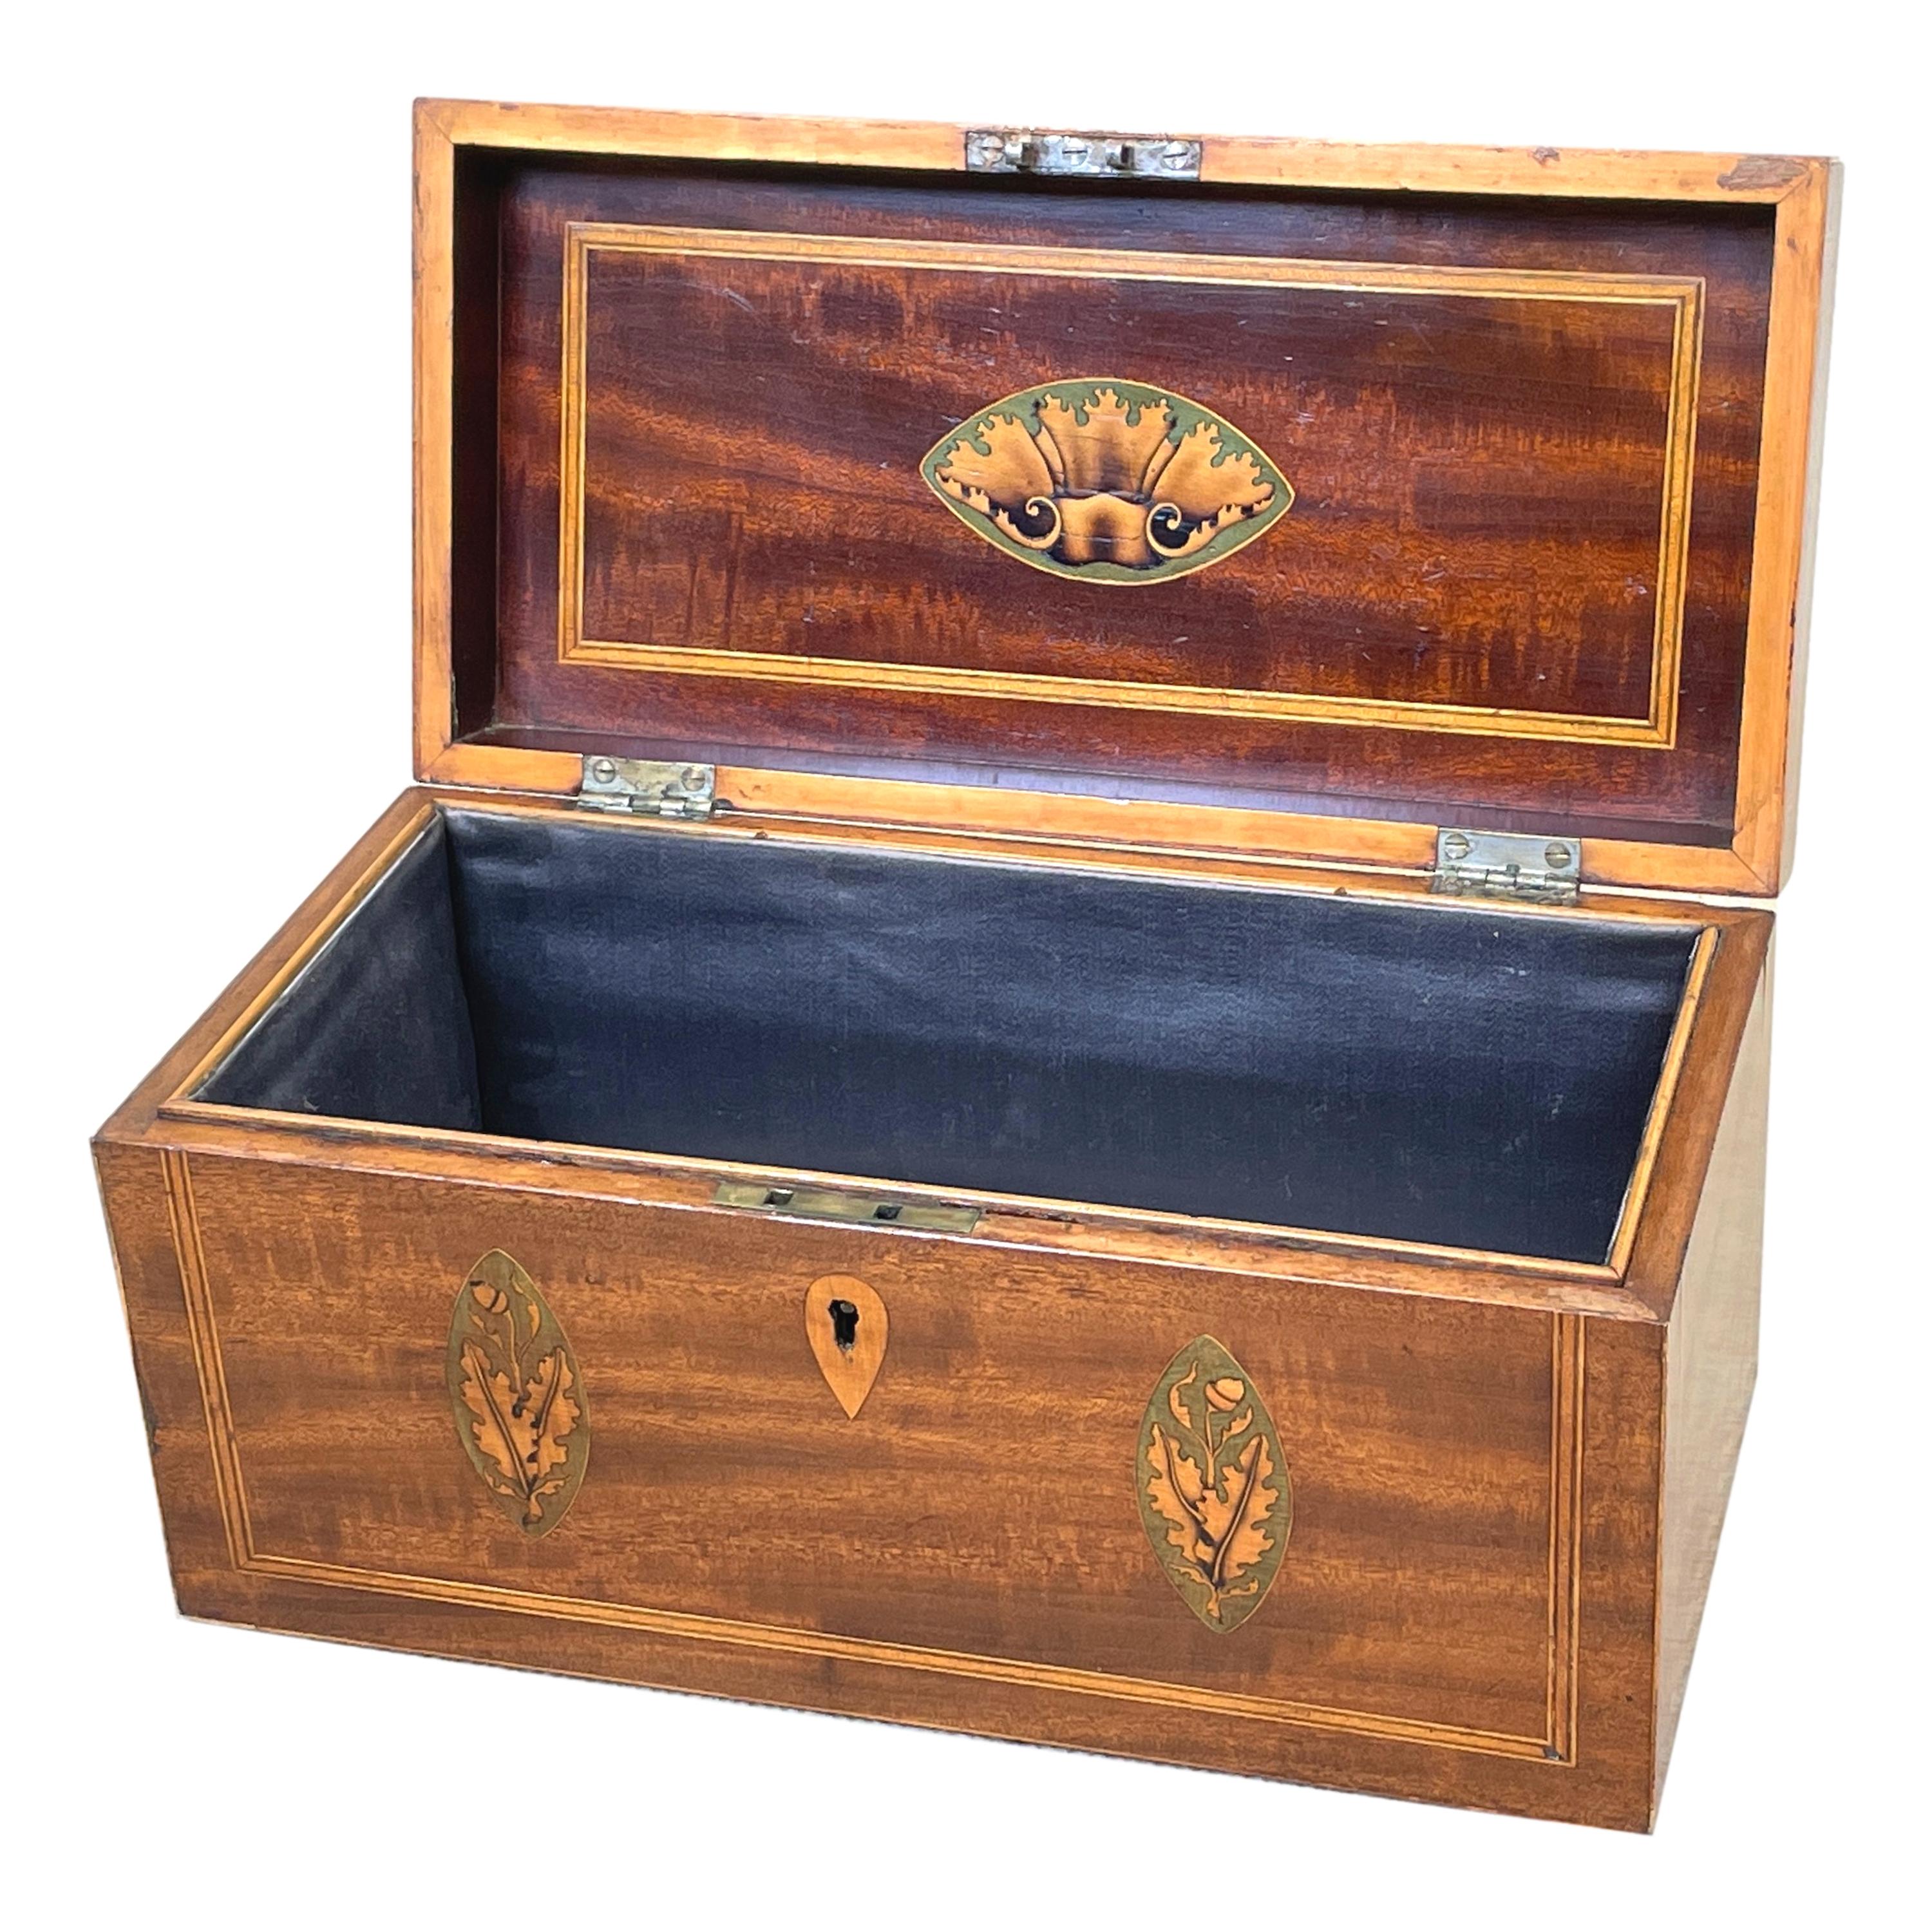 A good quality Georgian 18th century mahogany rectangular tea caddy having replacement brass axe drop handle to hinged lid enclosing cavity with attractive inlaid decoration throughout.

Tea was of course a very precious commodity throughout the